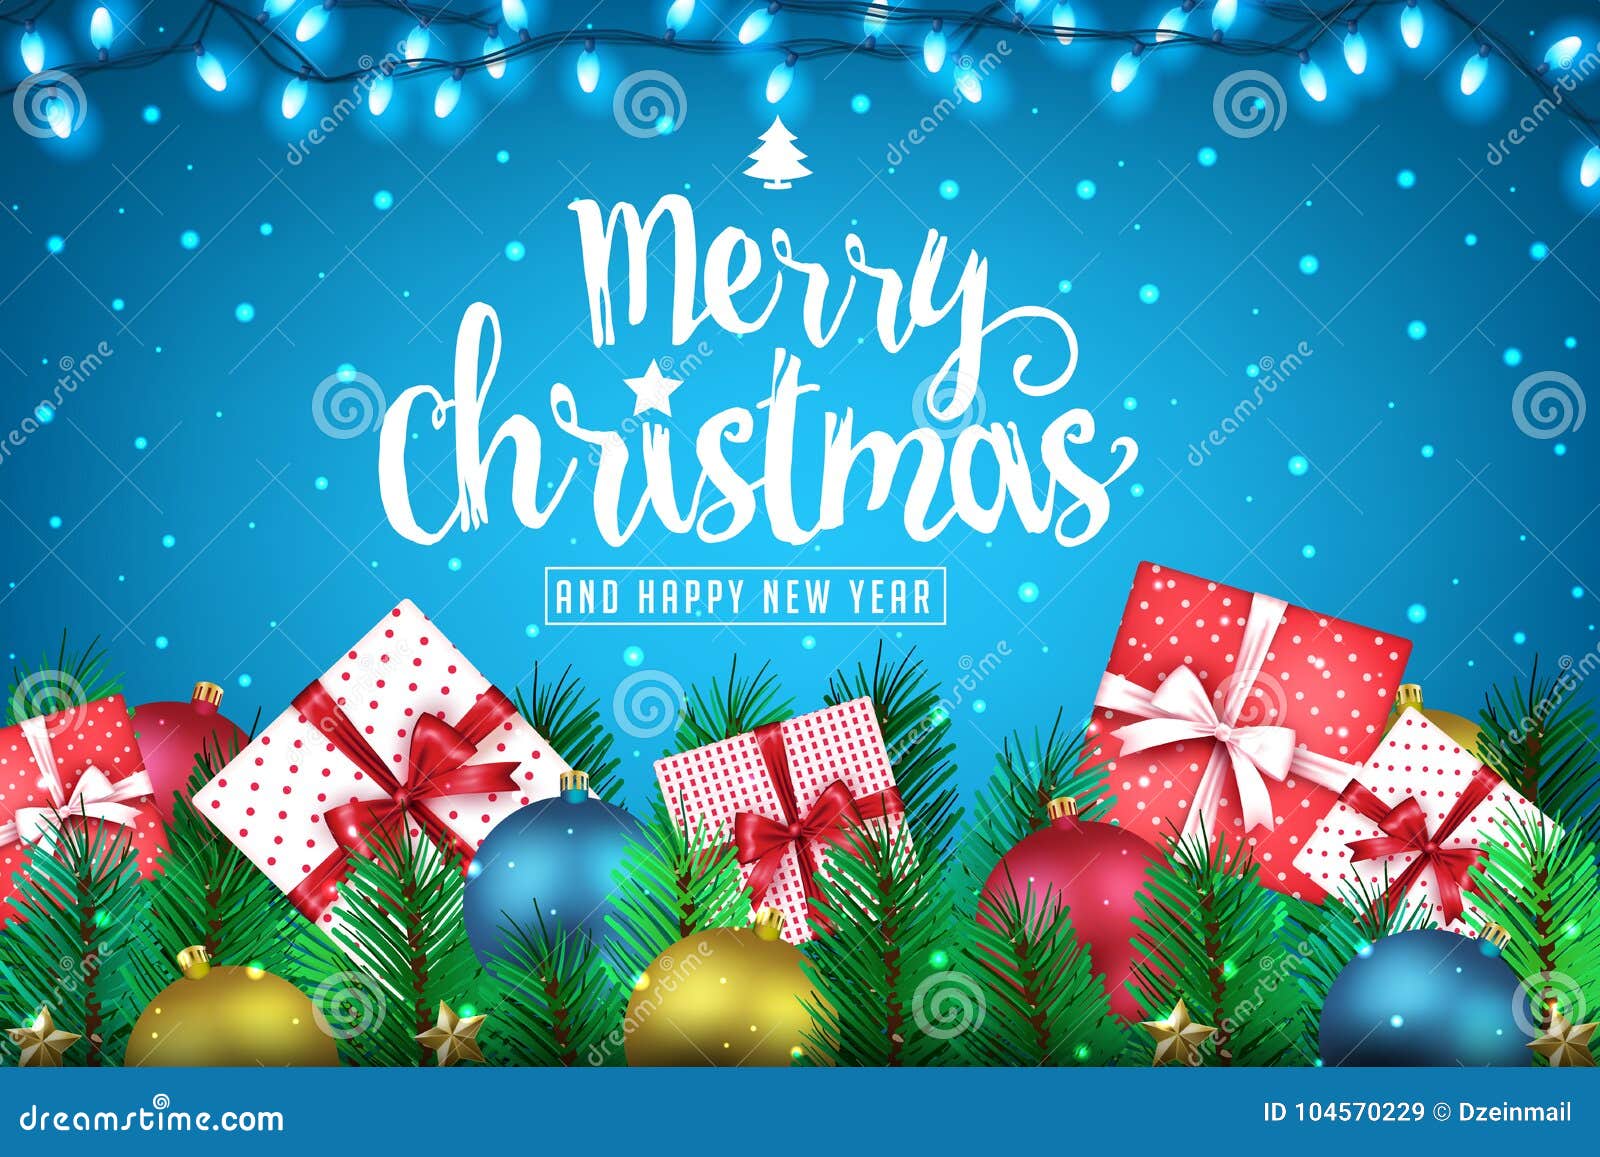 merry christmas and happy new year realistic creative banner with lots of presents